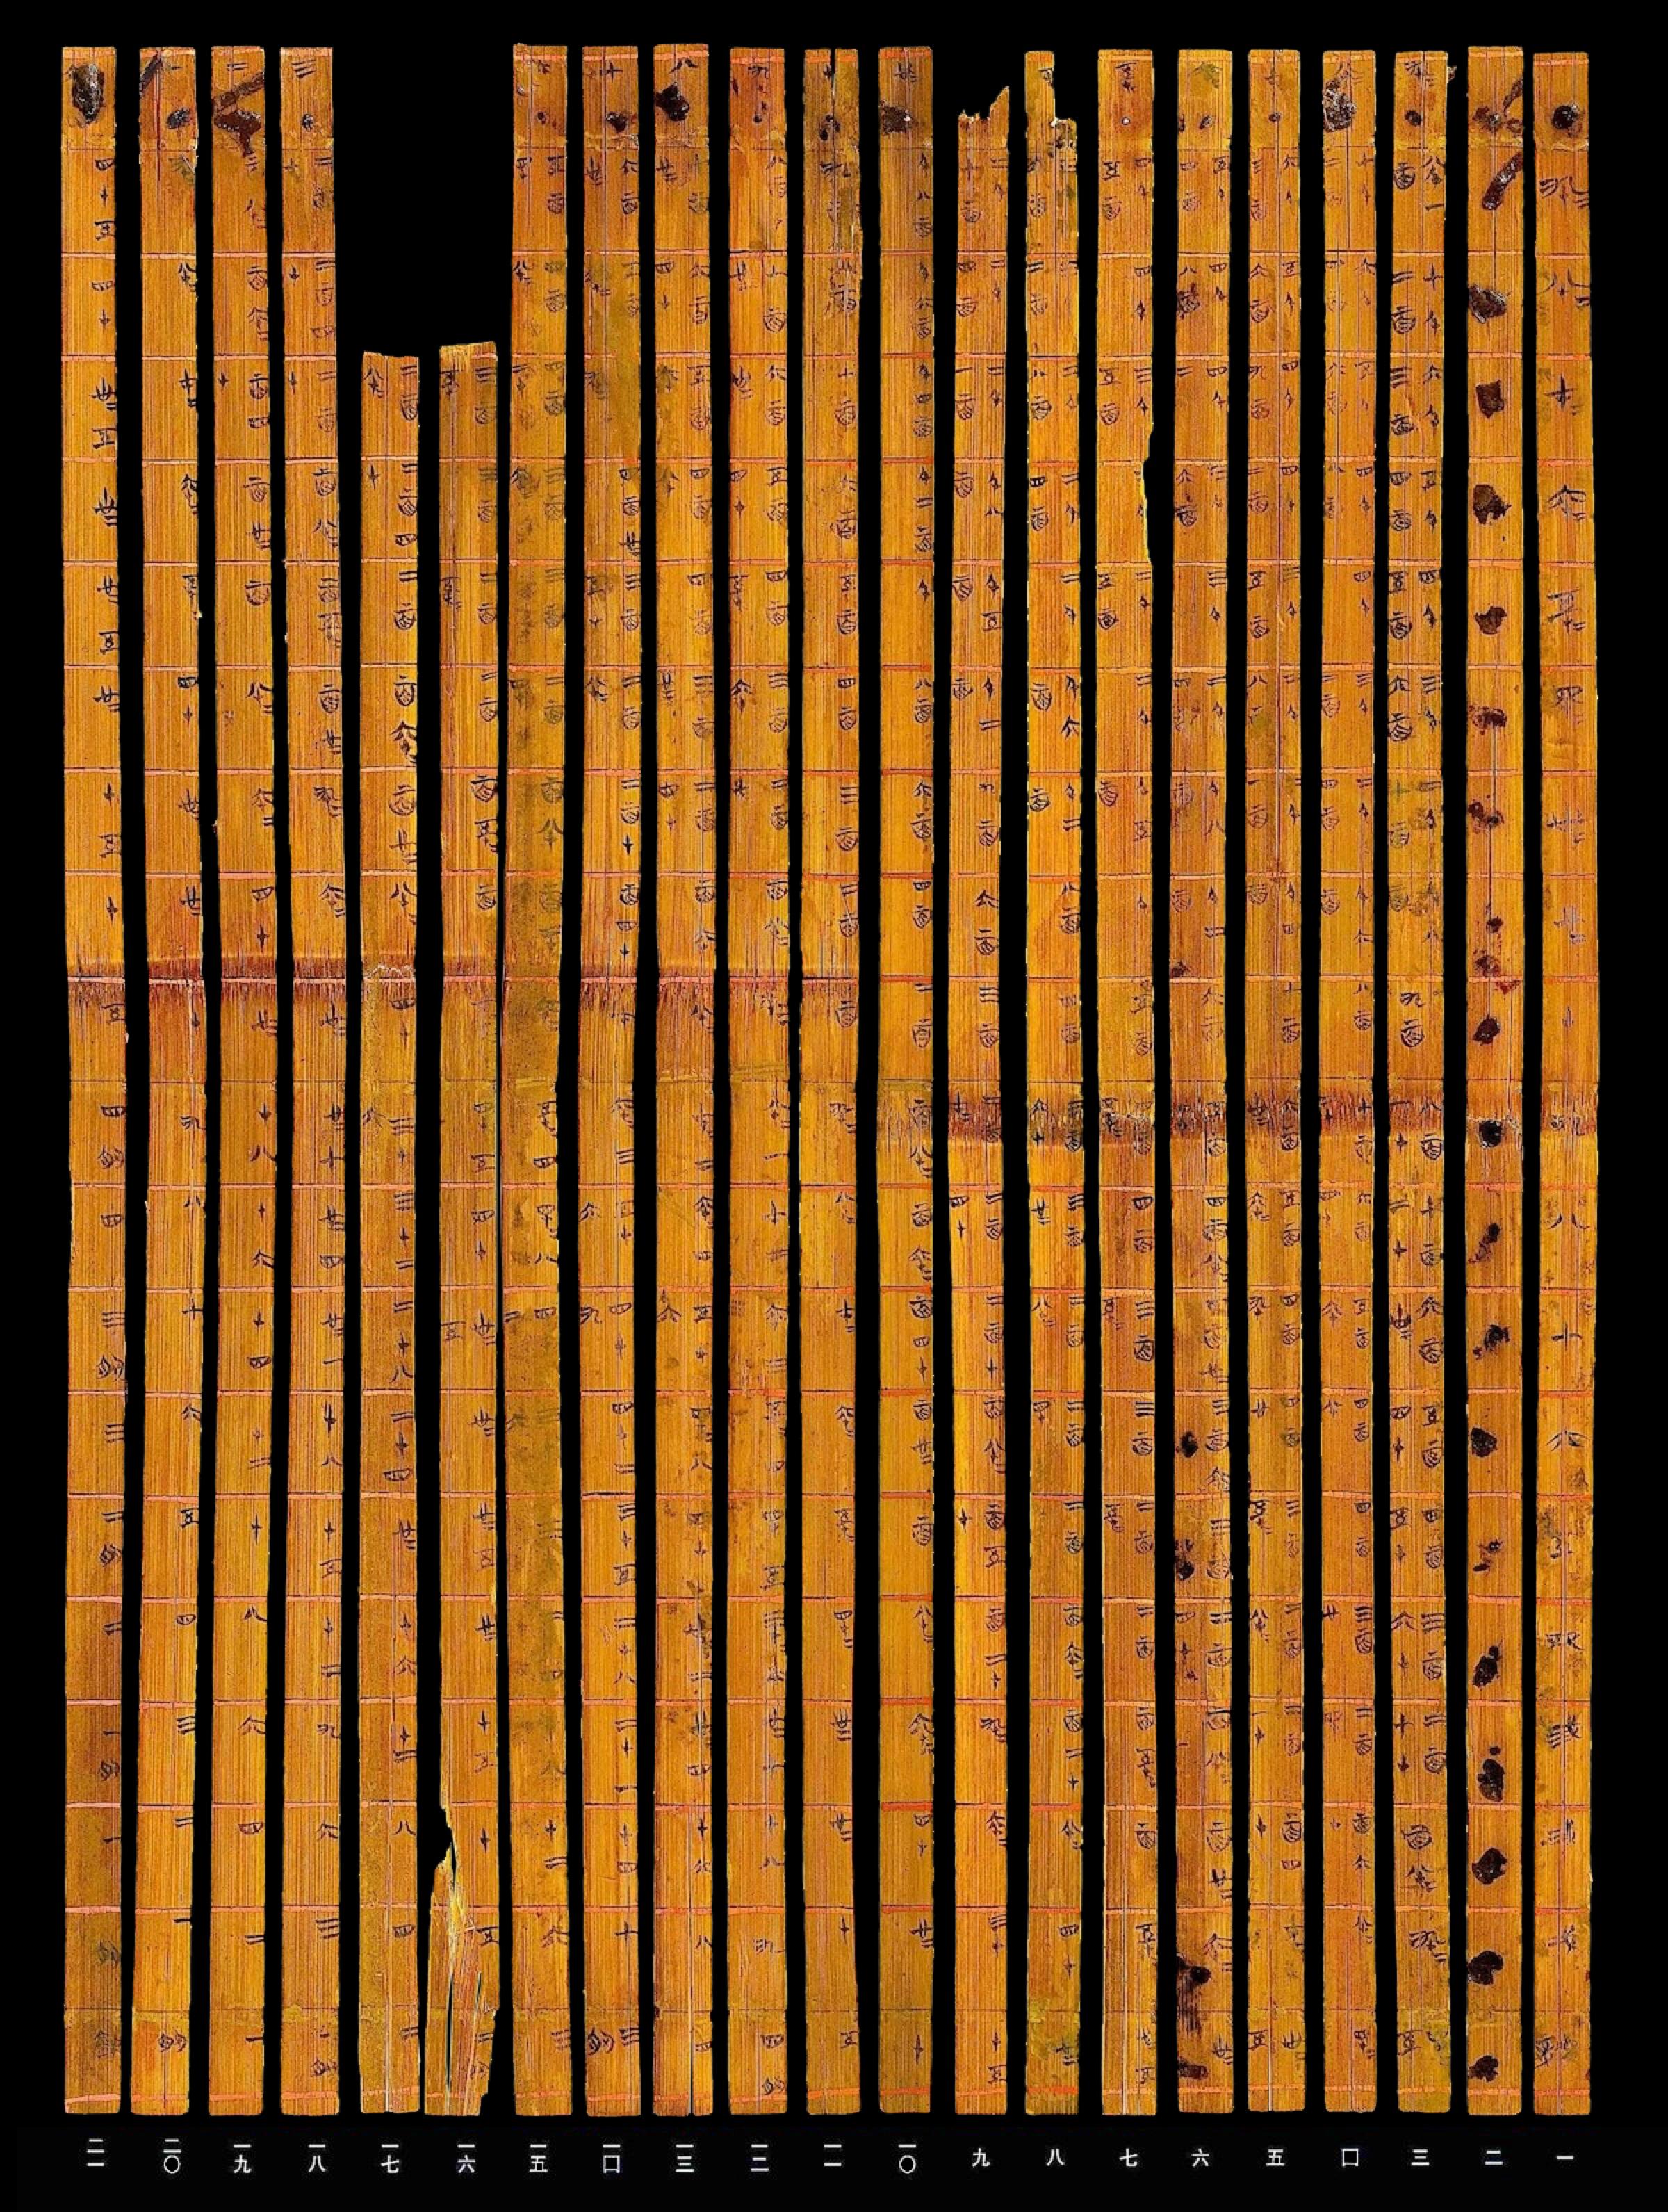 Bamboo-Strip Multiplication Table